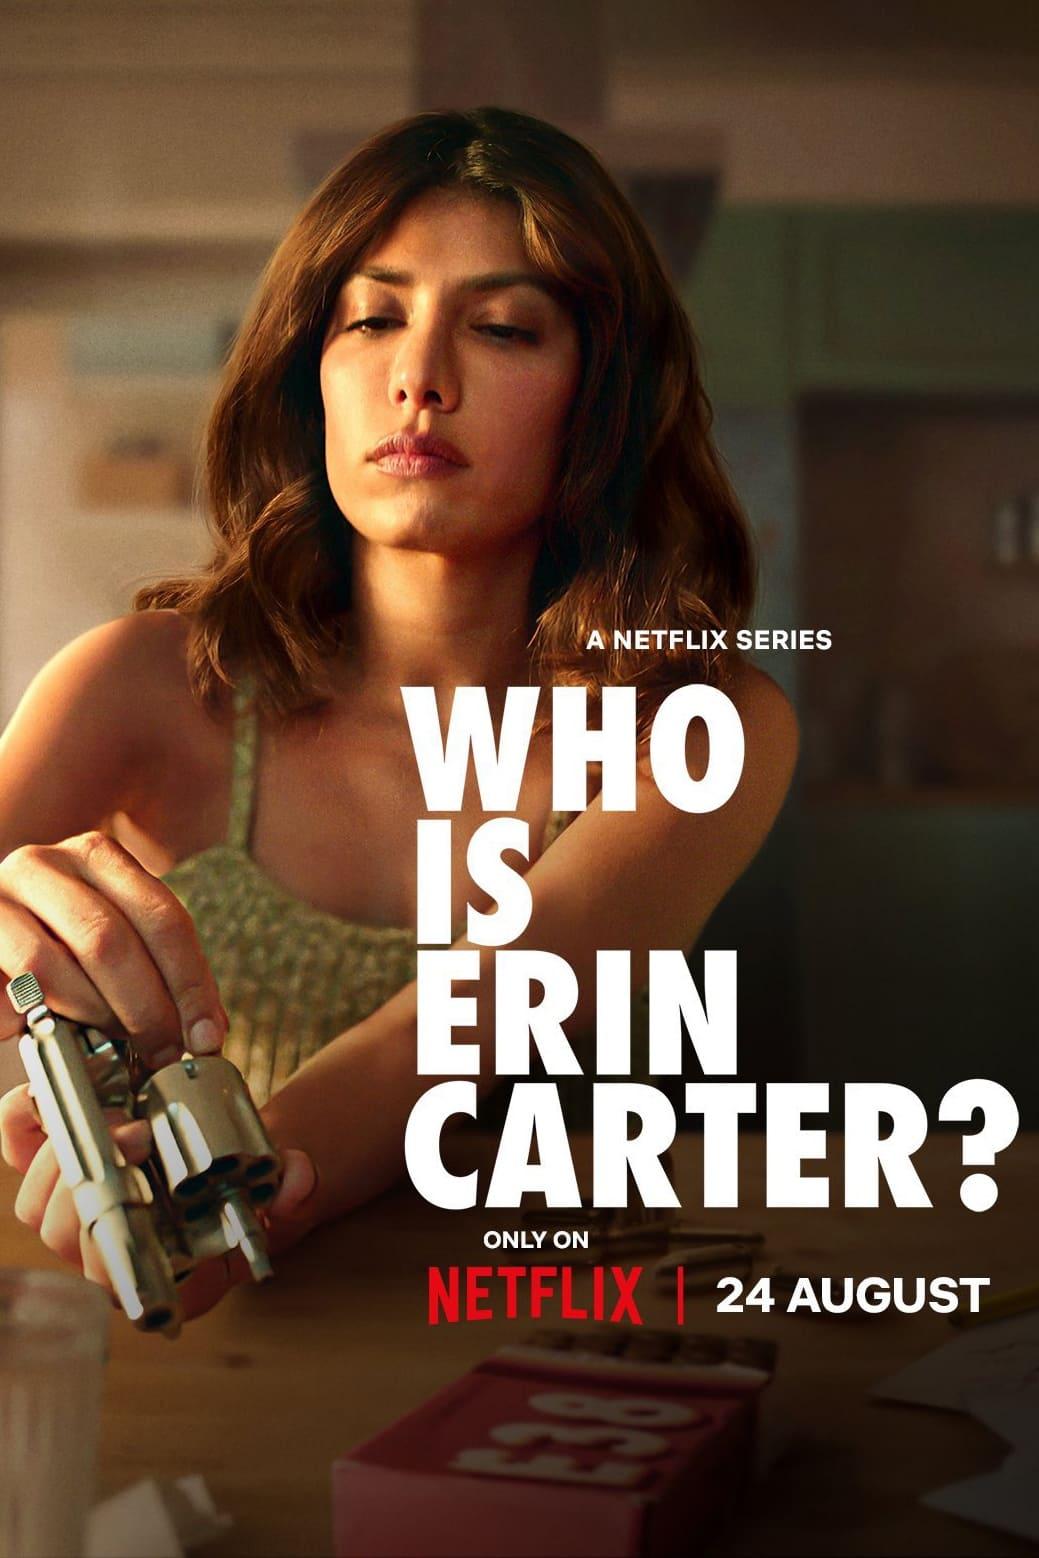 Who Is Erin Carter? poster